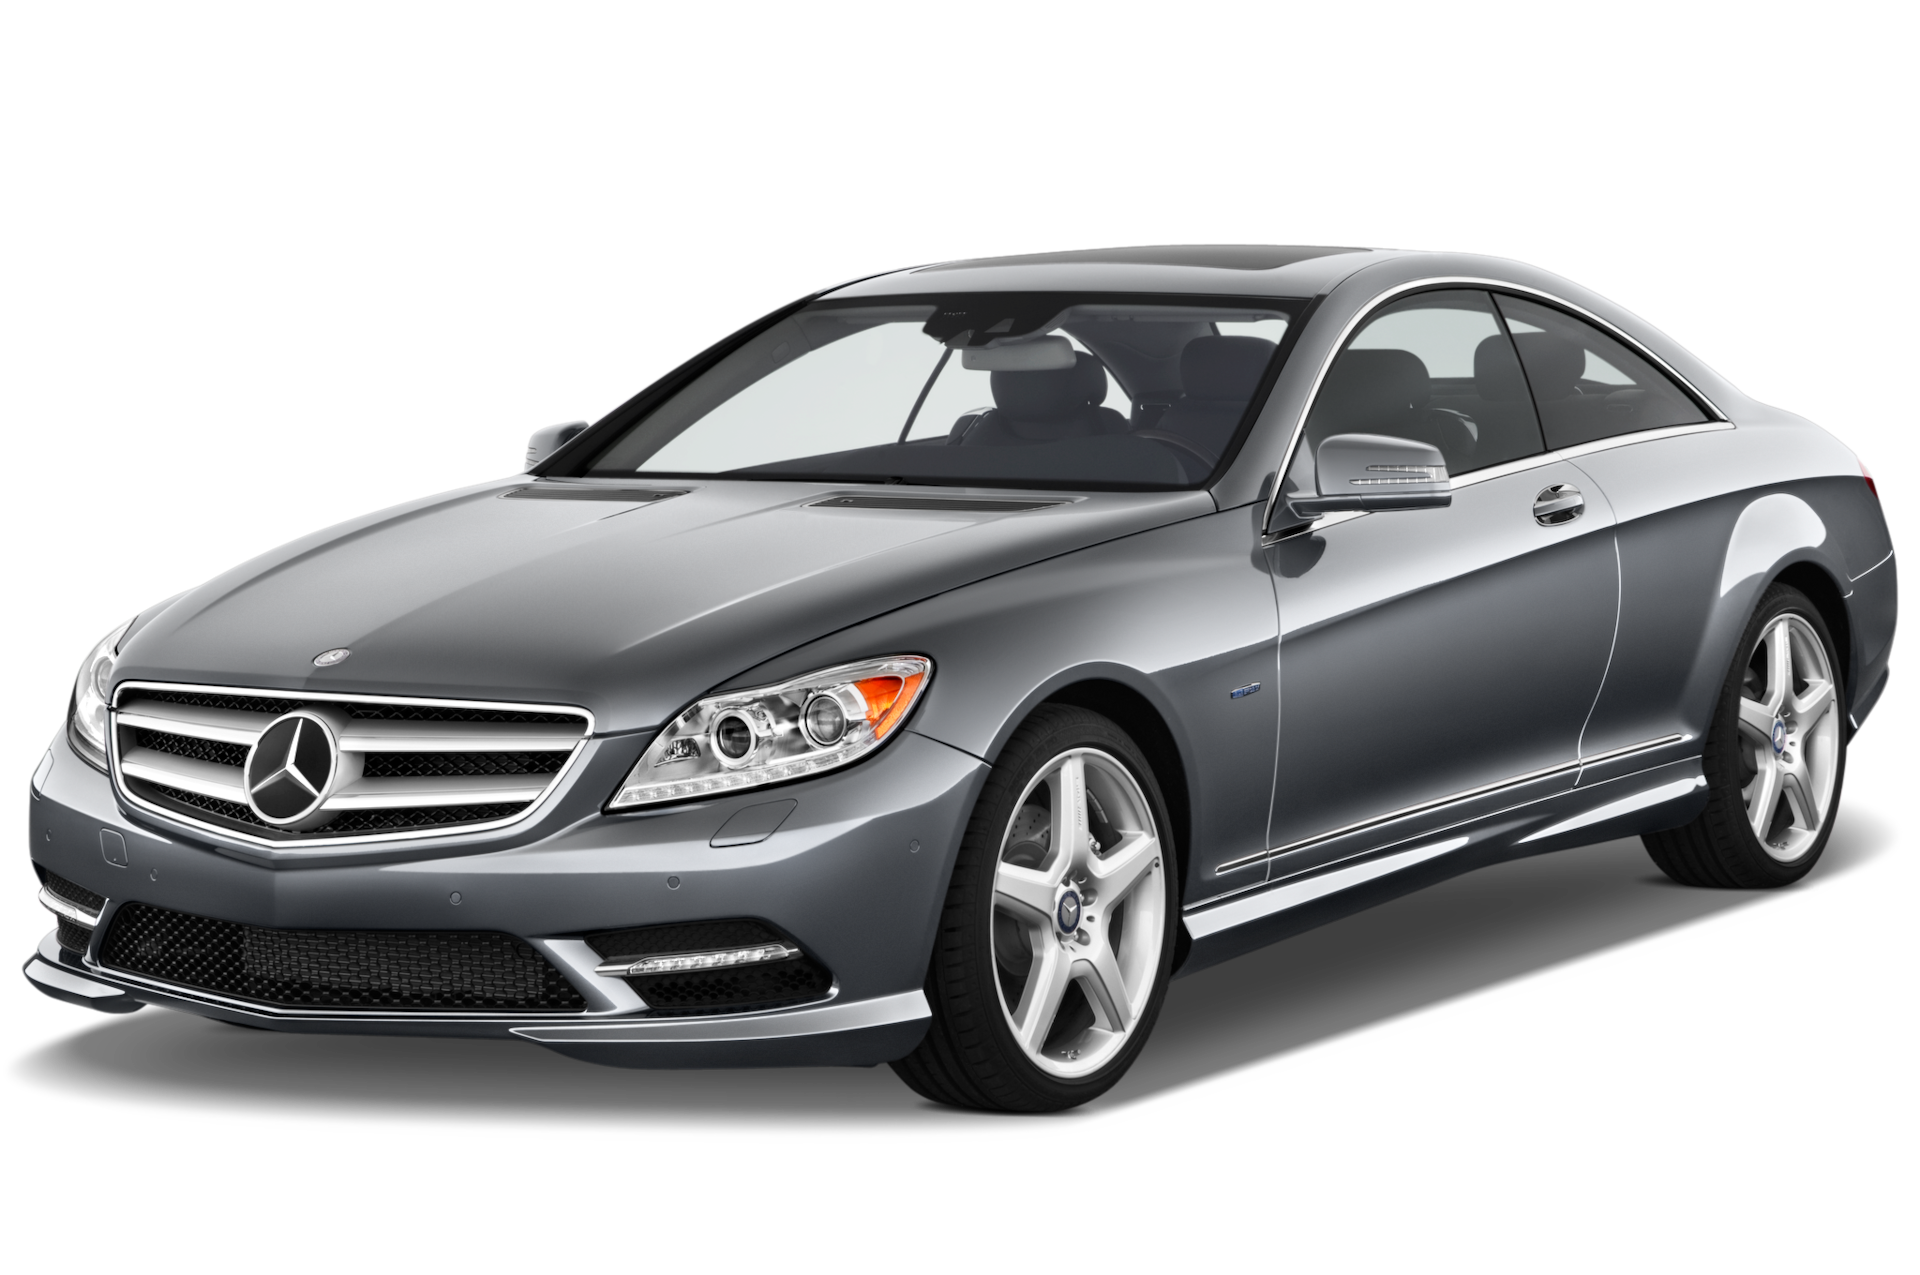 2013 Mercedes-Benz CL-Class Prices, Reviews, and Photos - MotorTrend